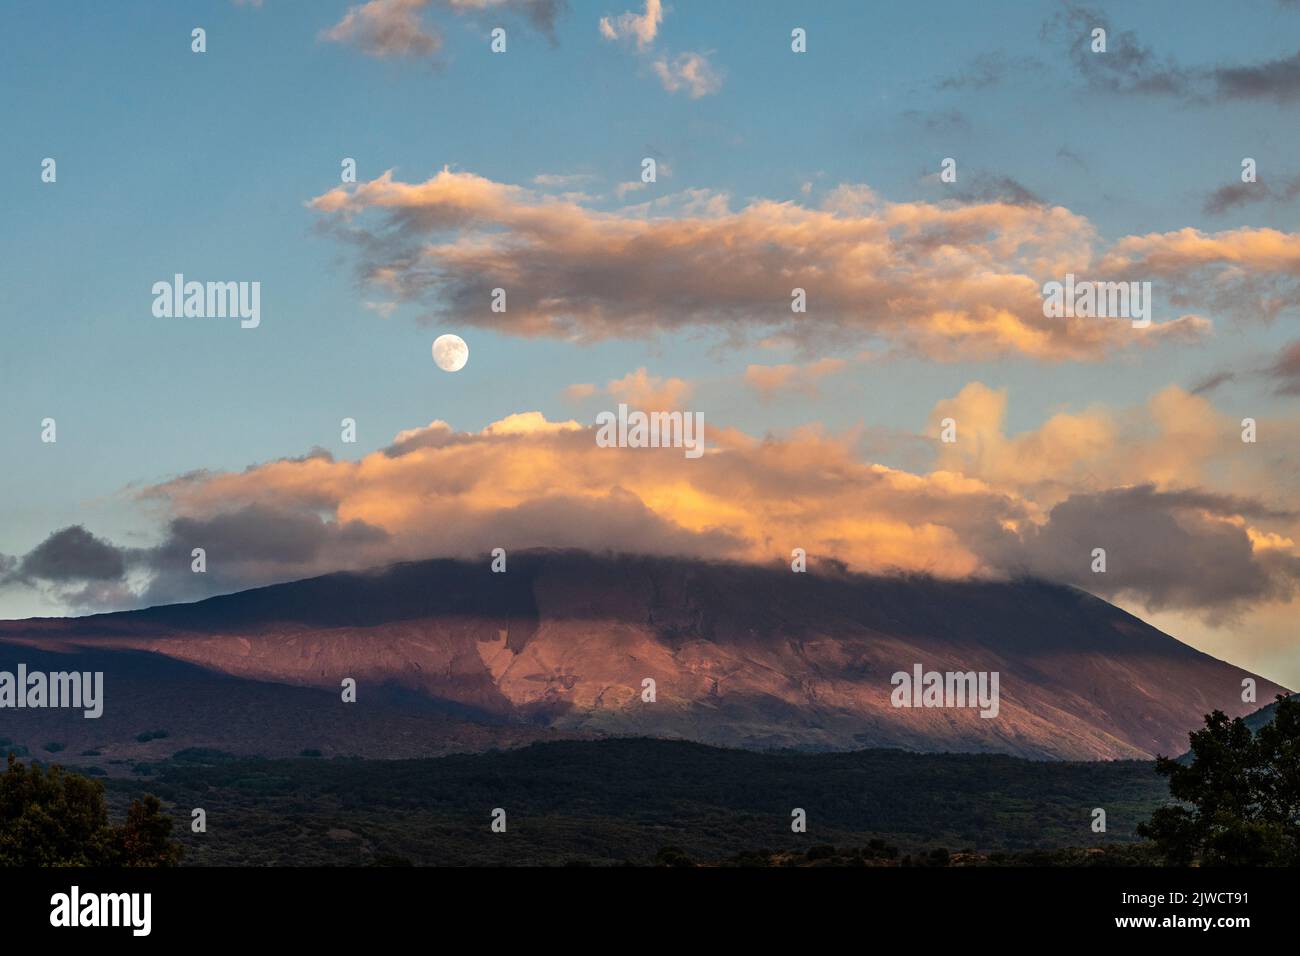 A full moon rising above Mount Etna, seen at sunset from the western side of the volcano Stock Photo